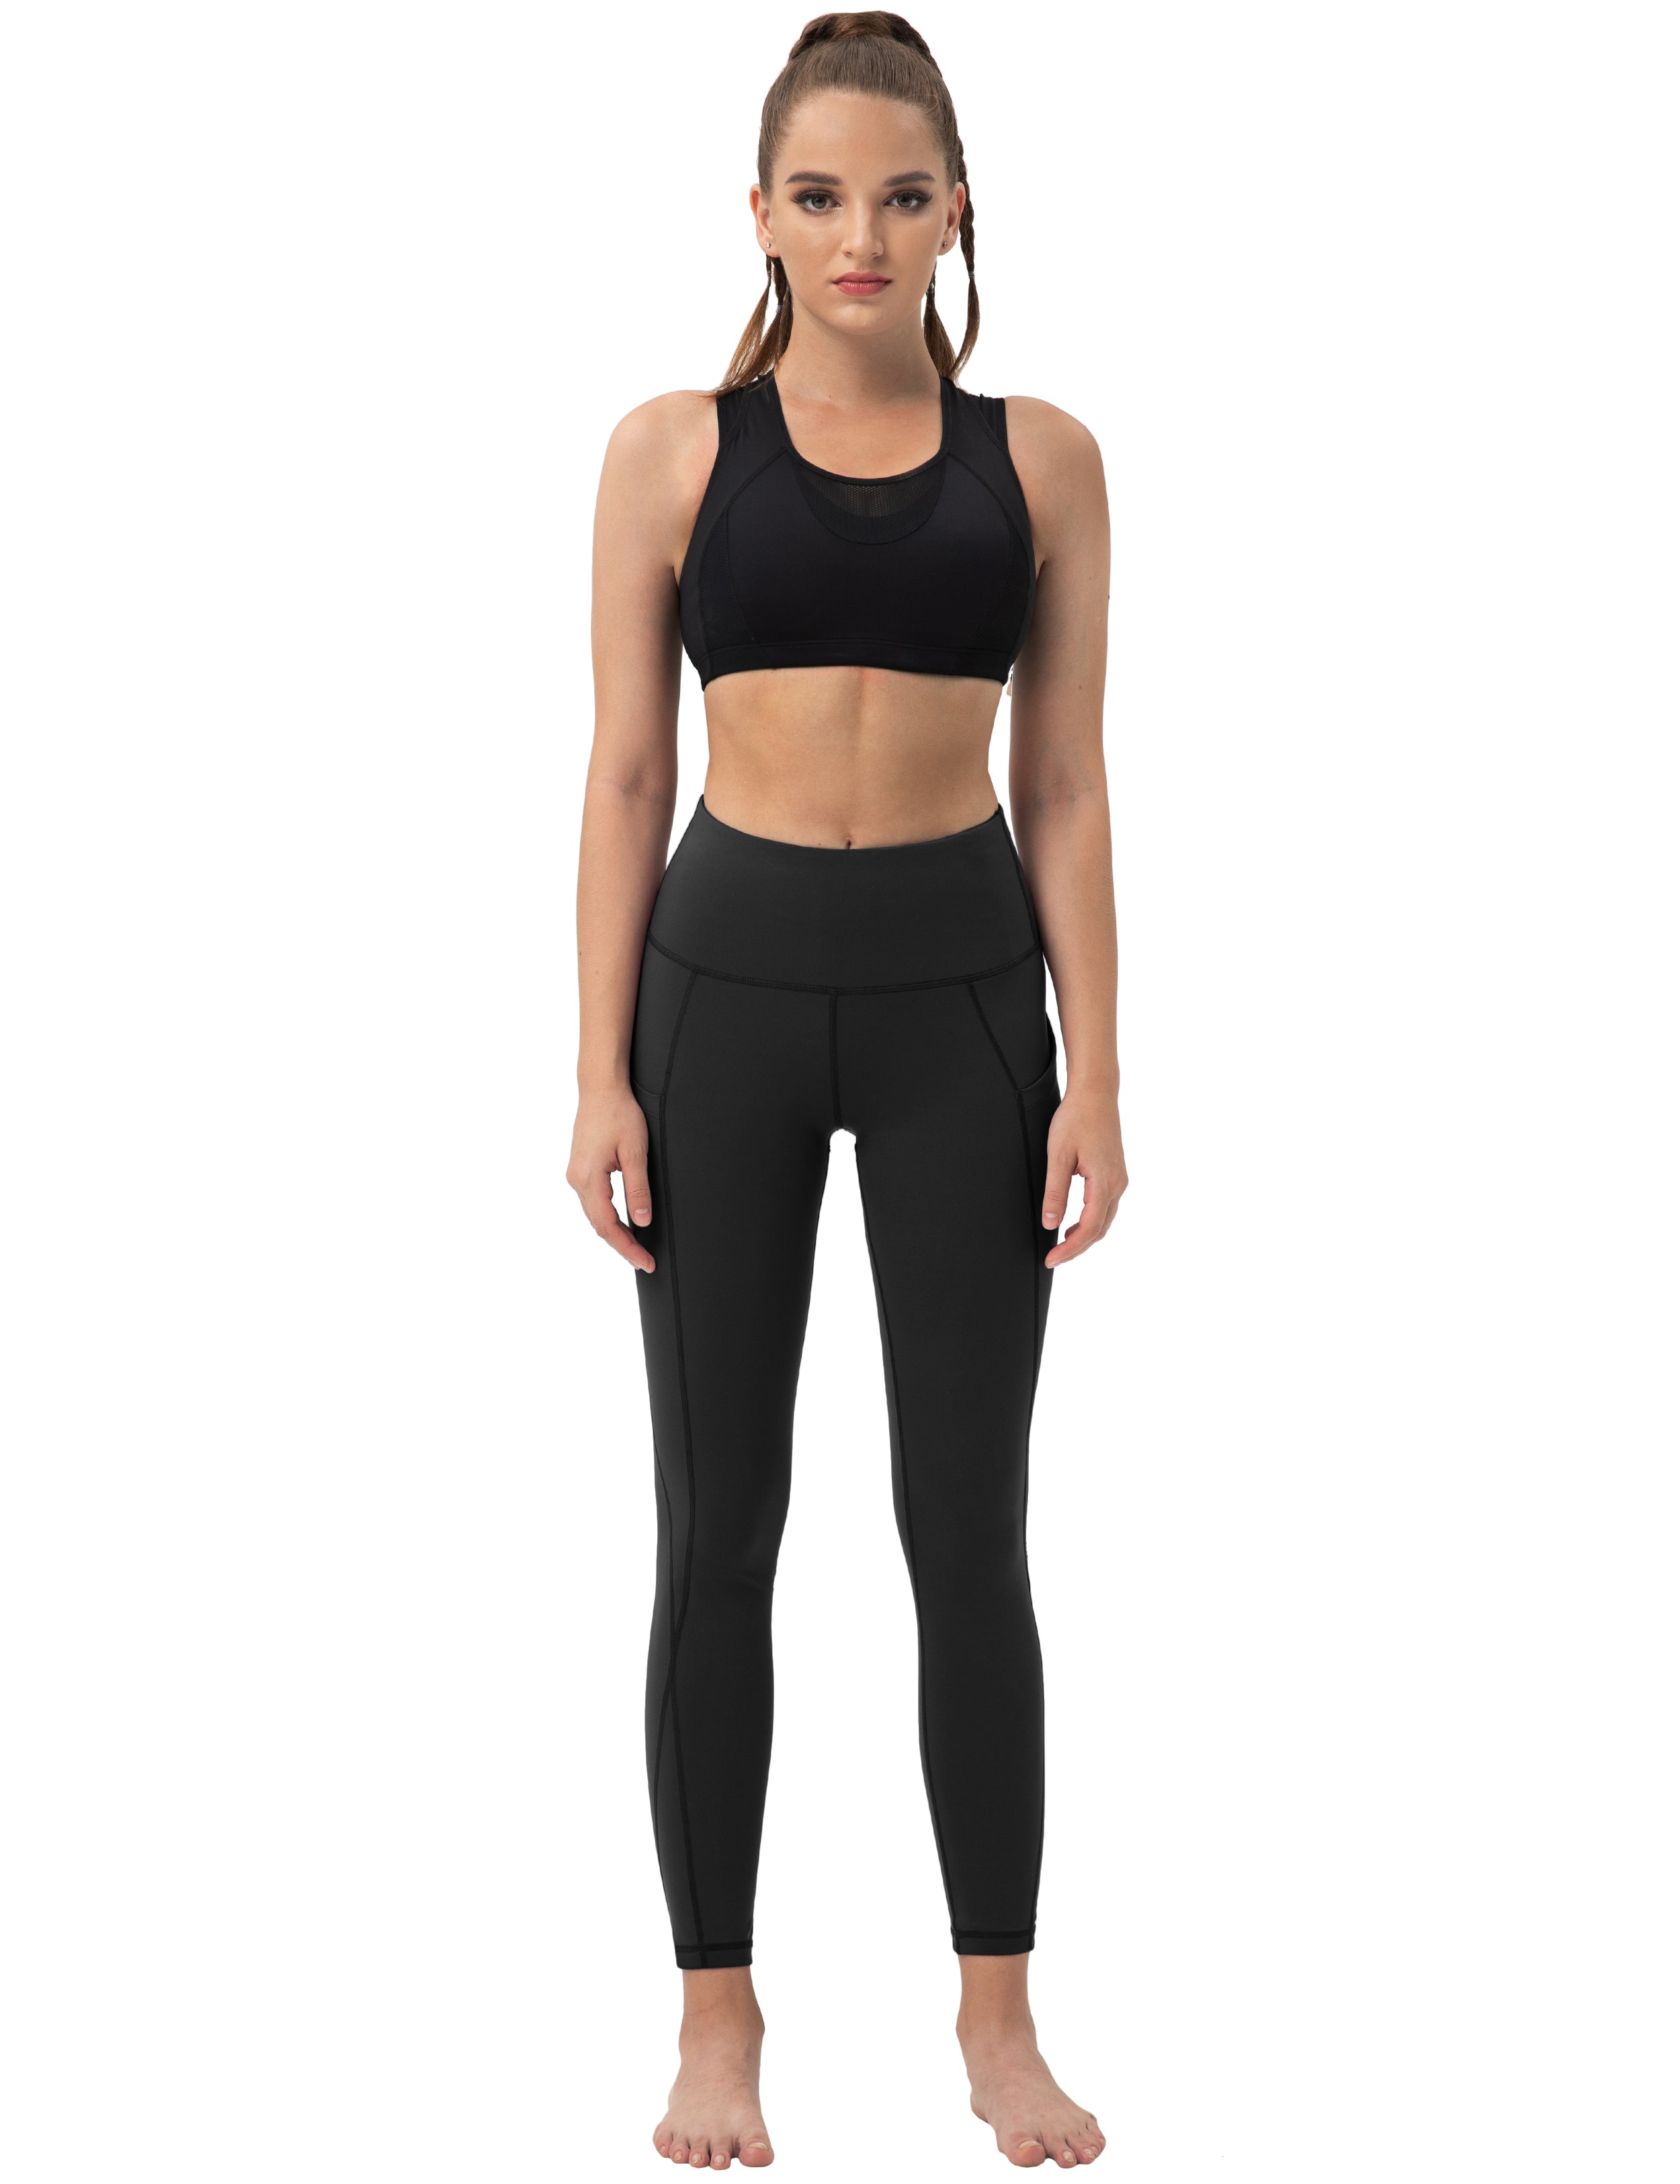 High Waist Side Pockets Tall Size Pants black 75% Nylon, 25% Spandex Fabric doesn't attract lint easily 4-way stretch No see-through Moisture-wicking Tummy control Inner pocket